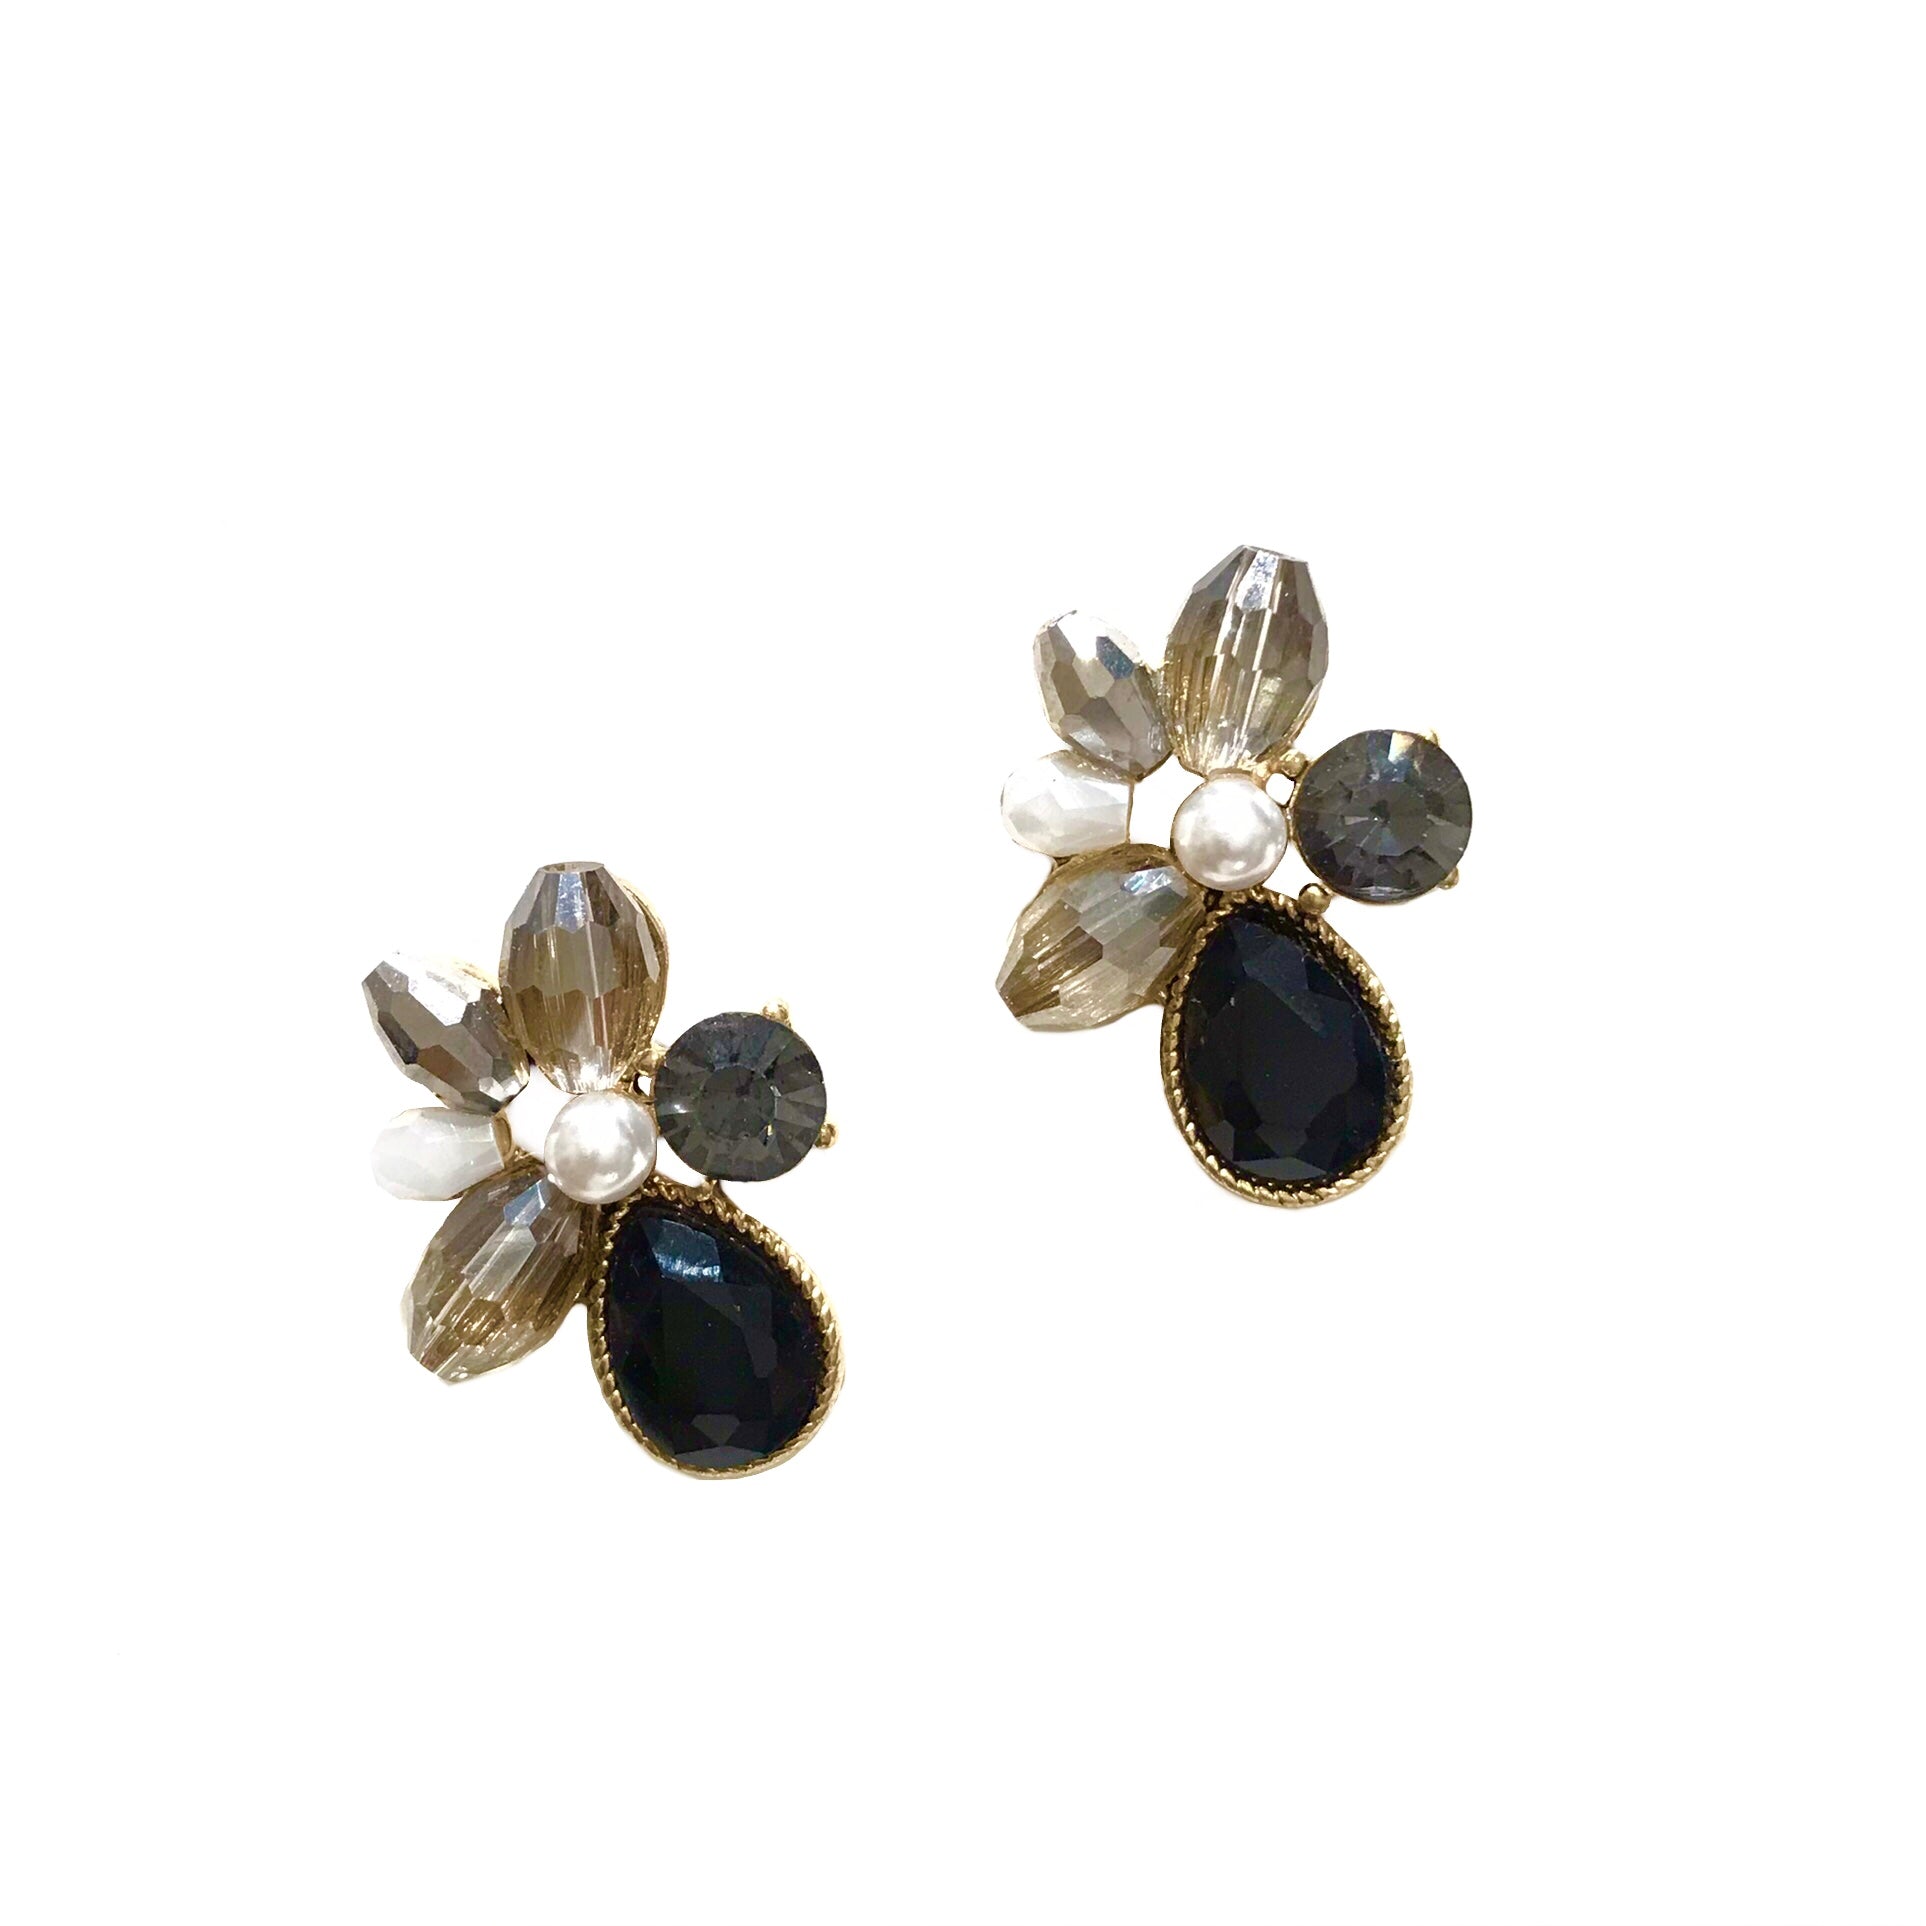 Lily Cluster Studs